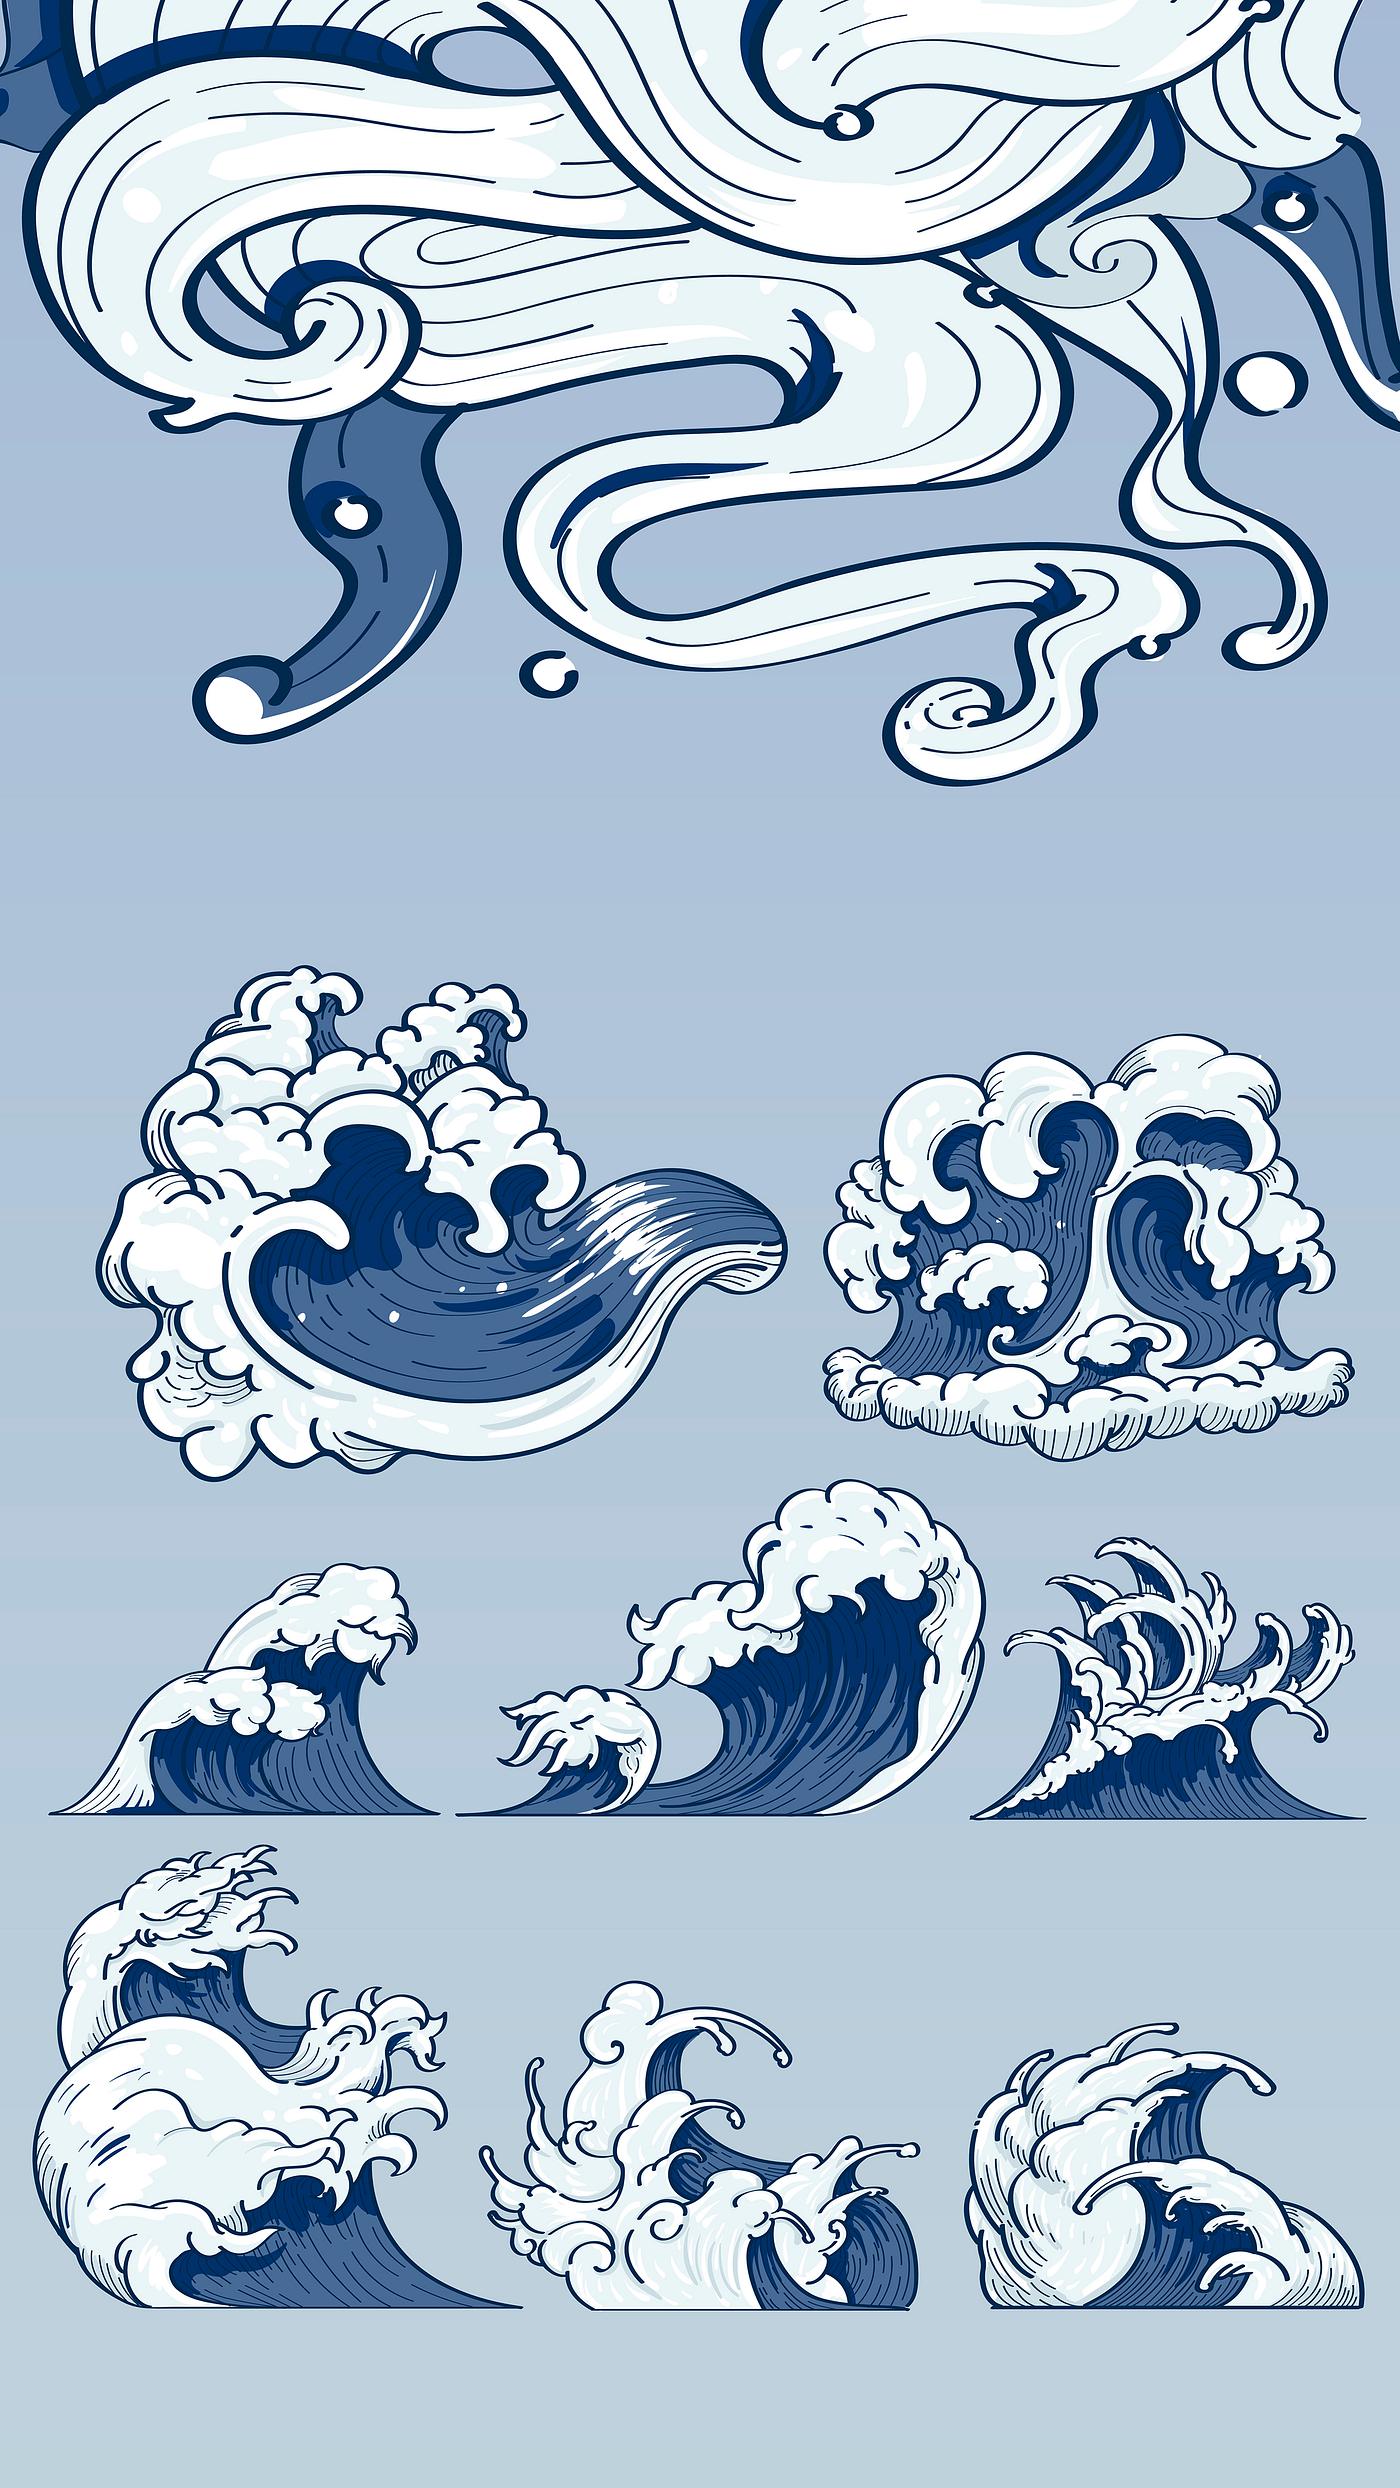 Japanese wave art doodles | Royalty free vector - 843143